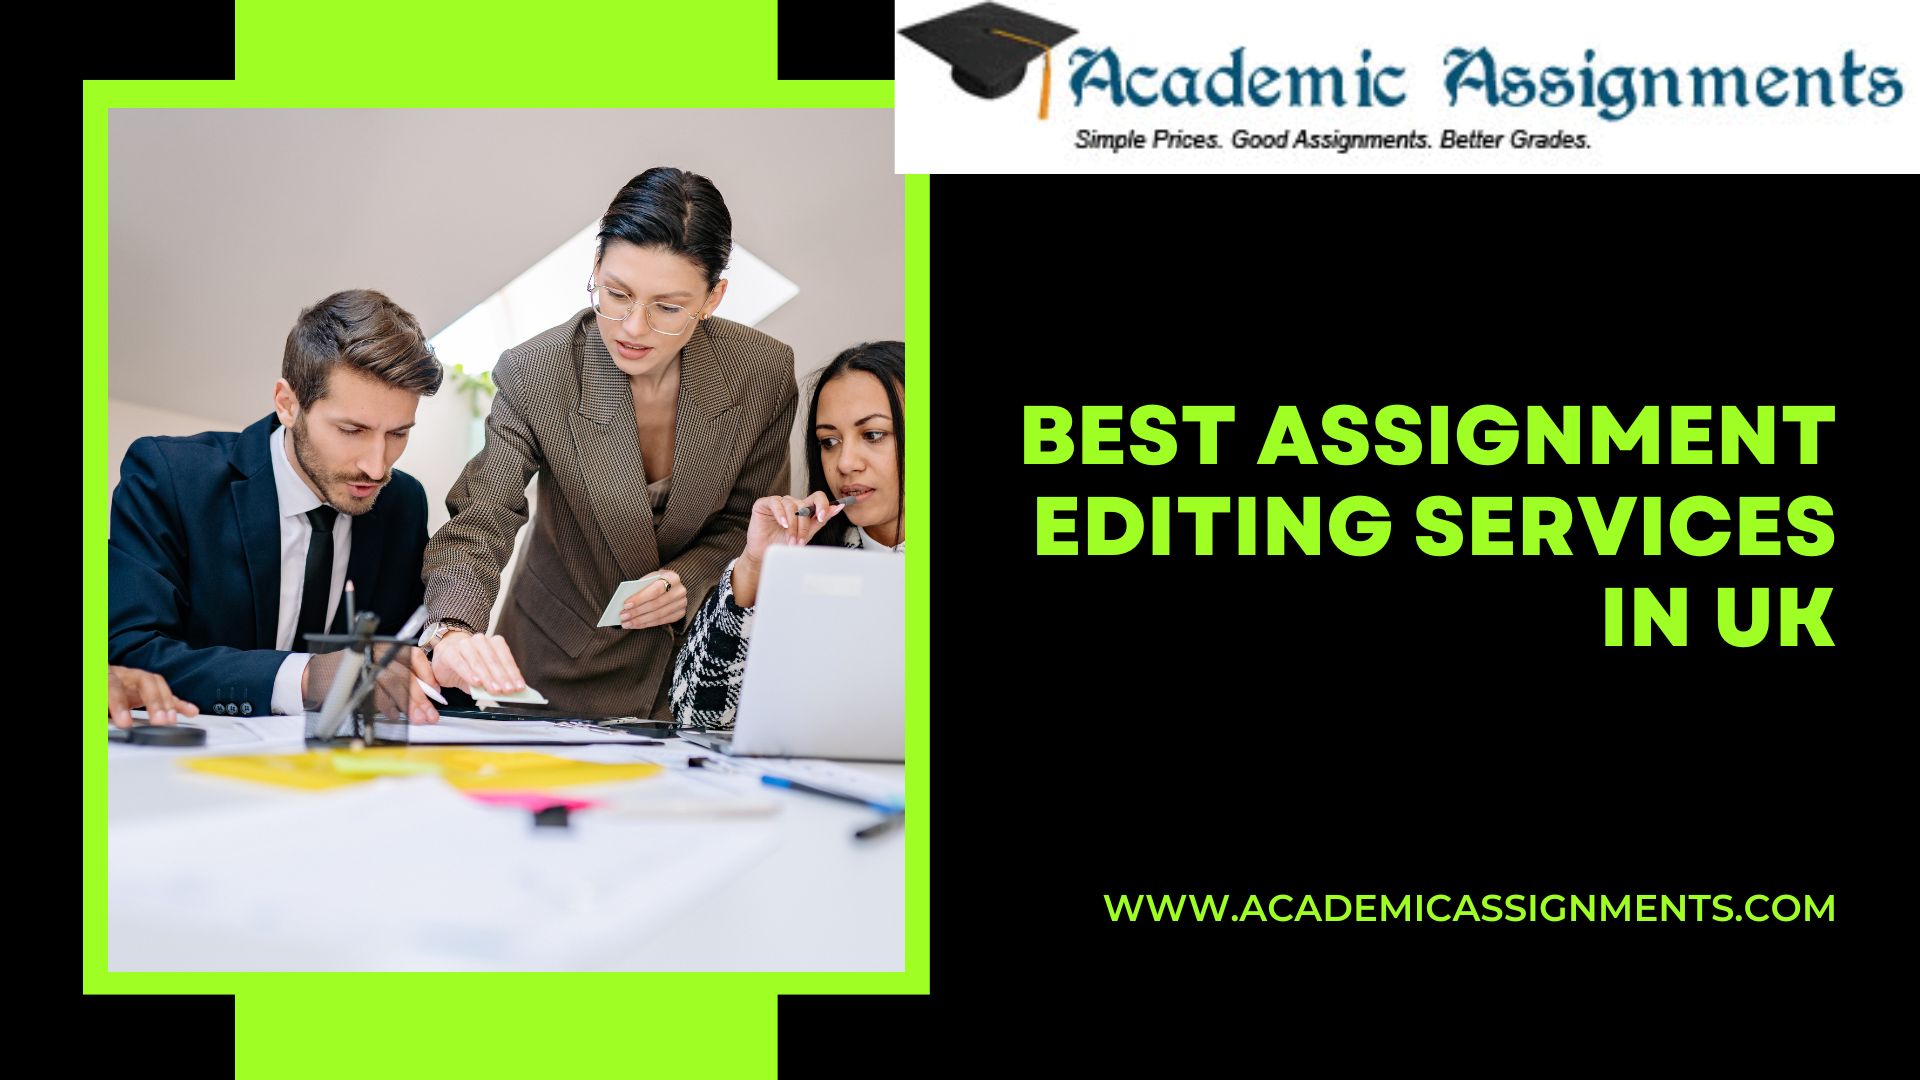 Best Assignment Editing Services in UK